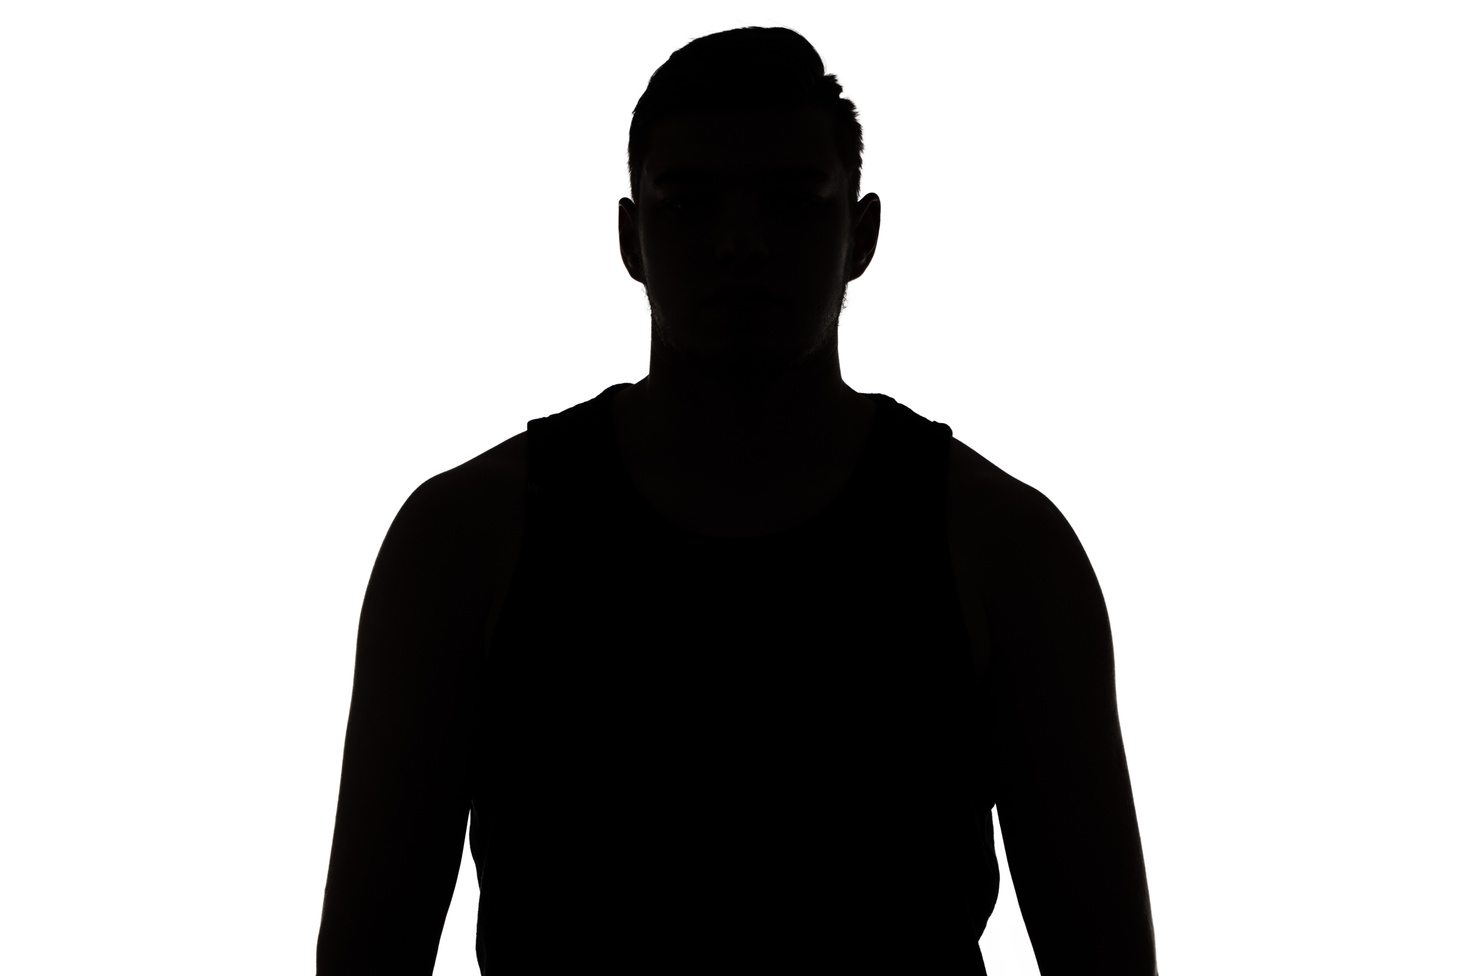 Image of young man's silhouette